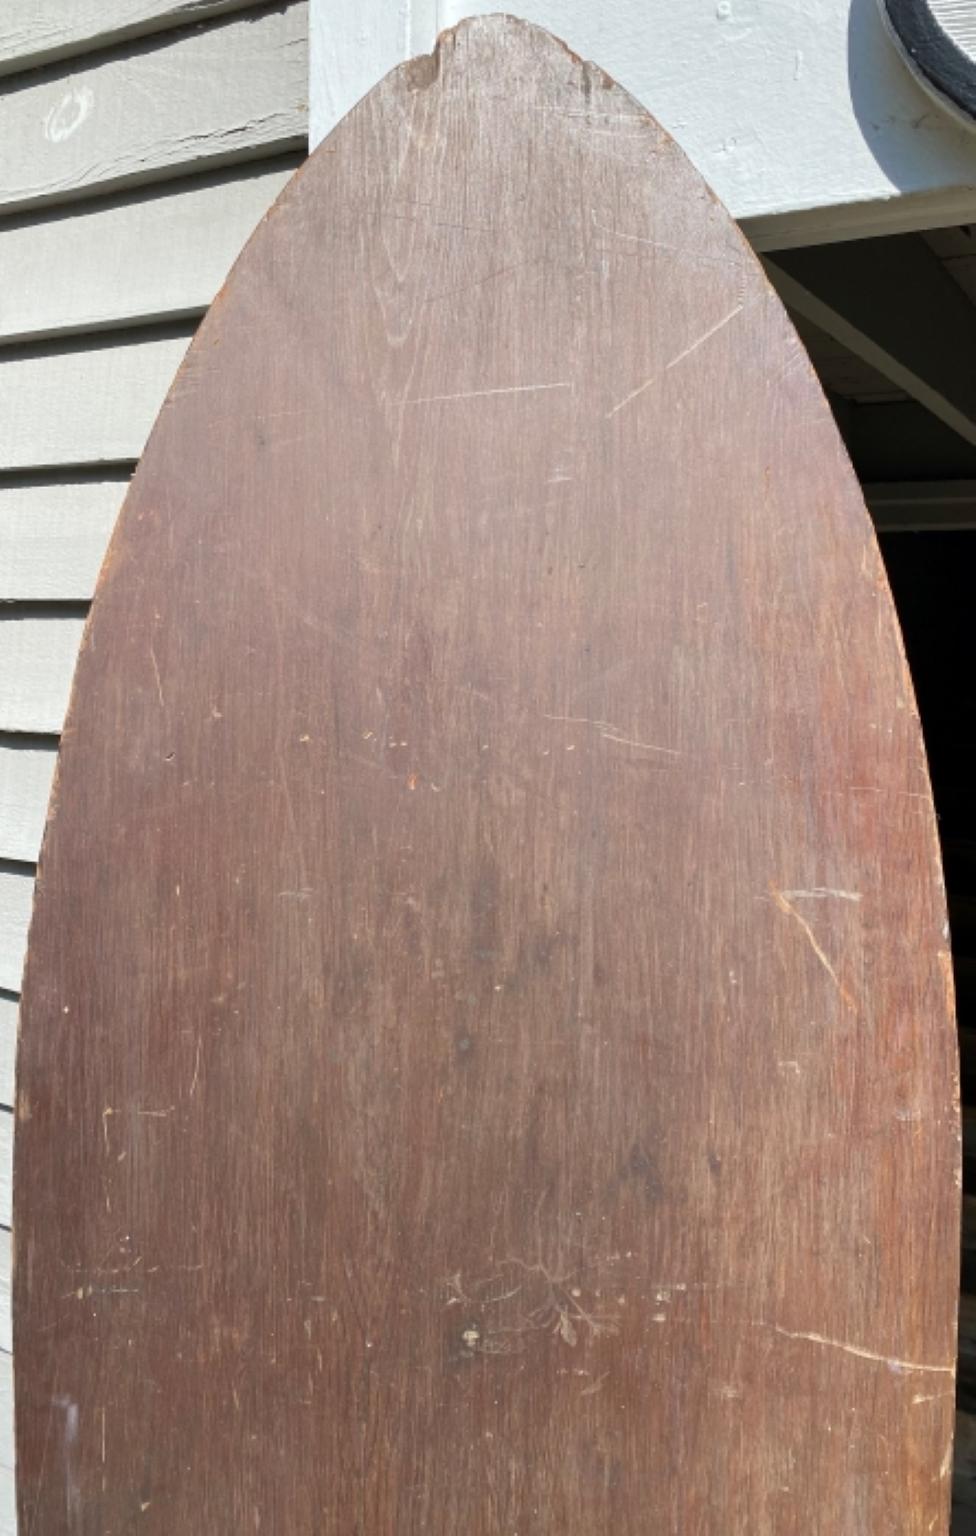 Surfboard 100cm Dekoration aus Holz Another Day in Paradise Hawaii Mauii Style 